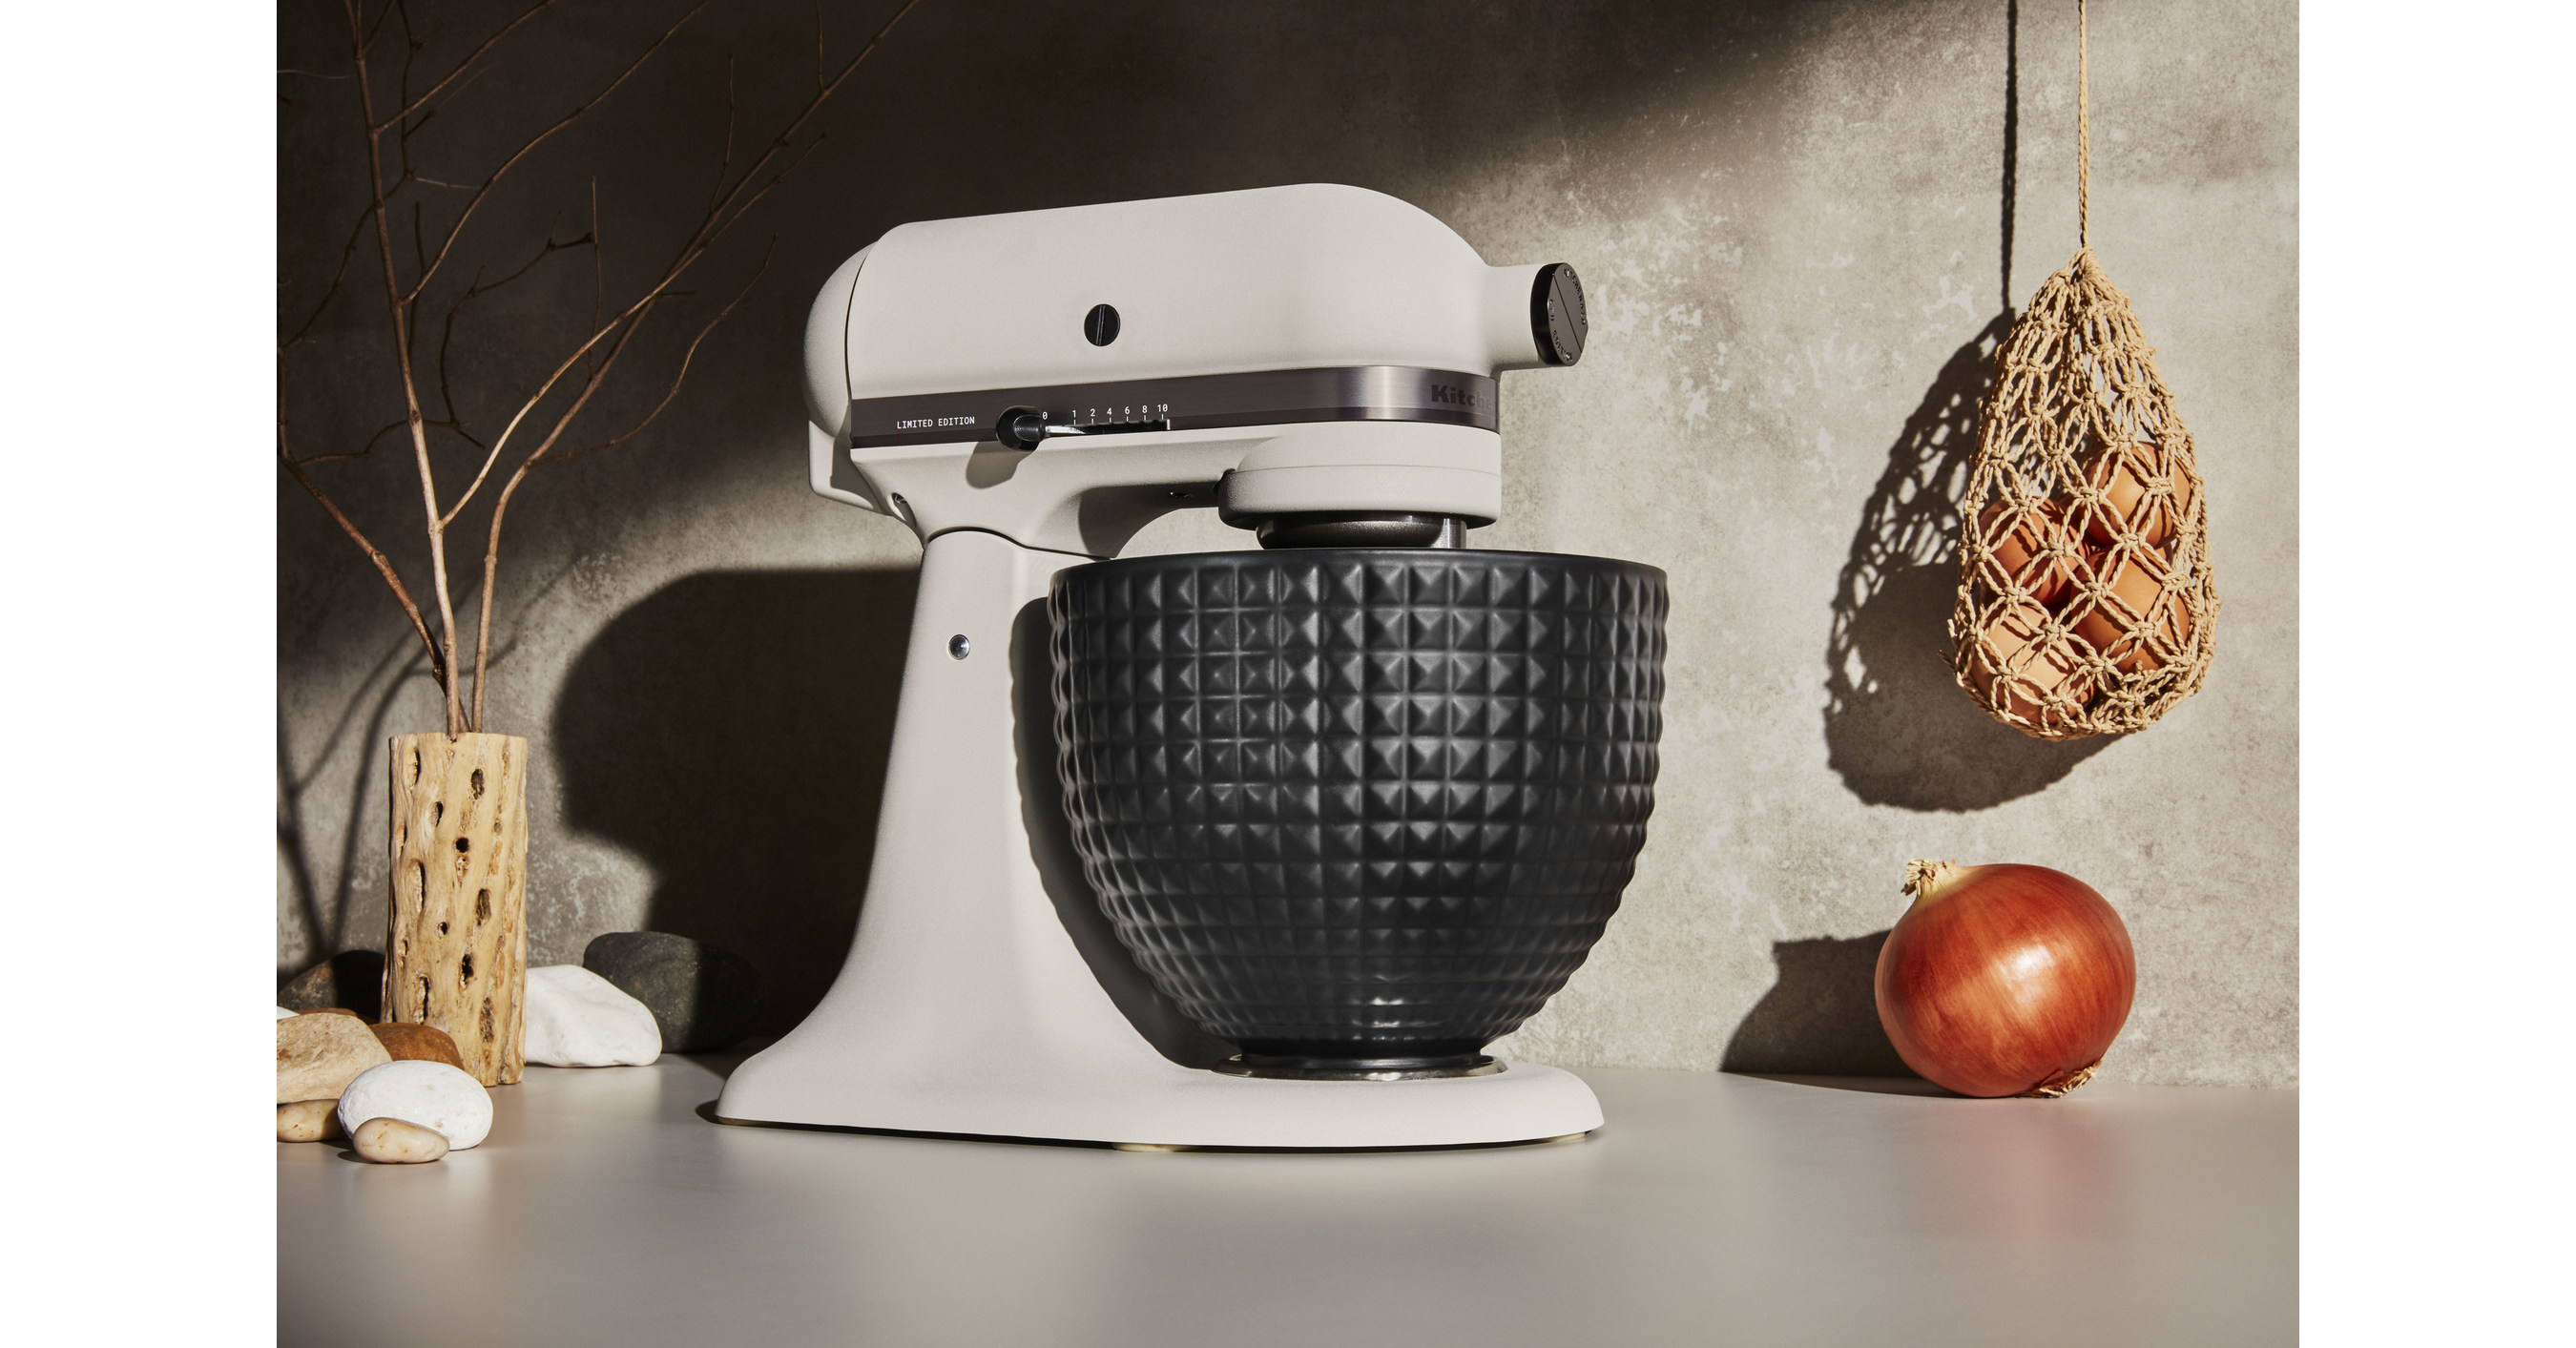 NEW KITCHENAID GO™ CORDLESS SYSTEM REDEFINES CORDLESS SMALL APPLIANCES WITH  GROUNDBREAKING INNOVATION